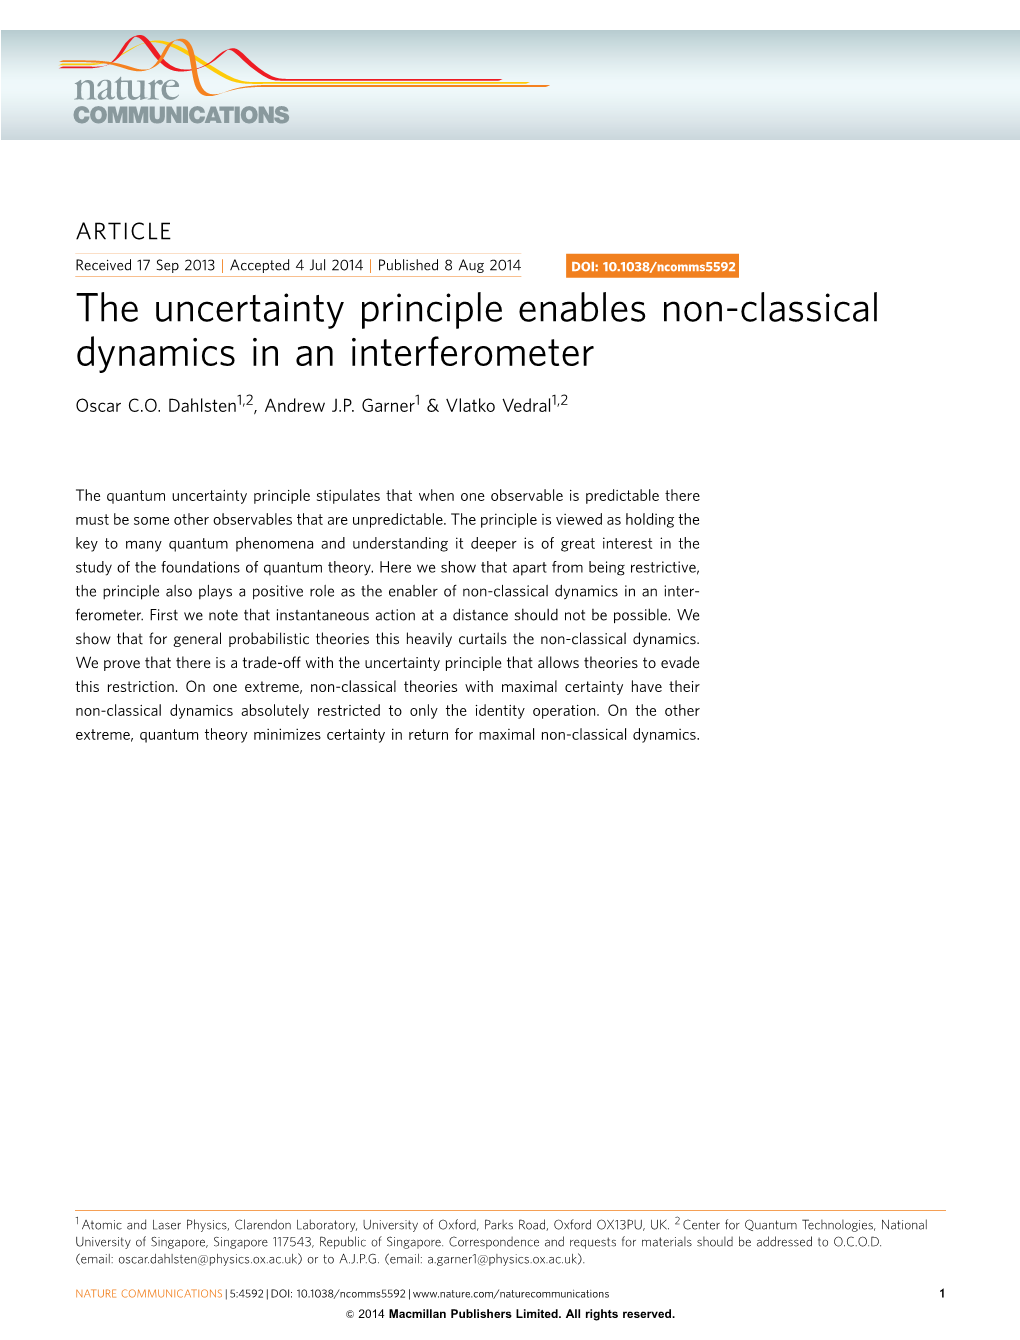 The Uncertainty Principle Enables Non-Classical Dynamics in an Interferometer